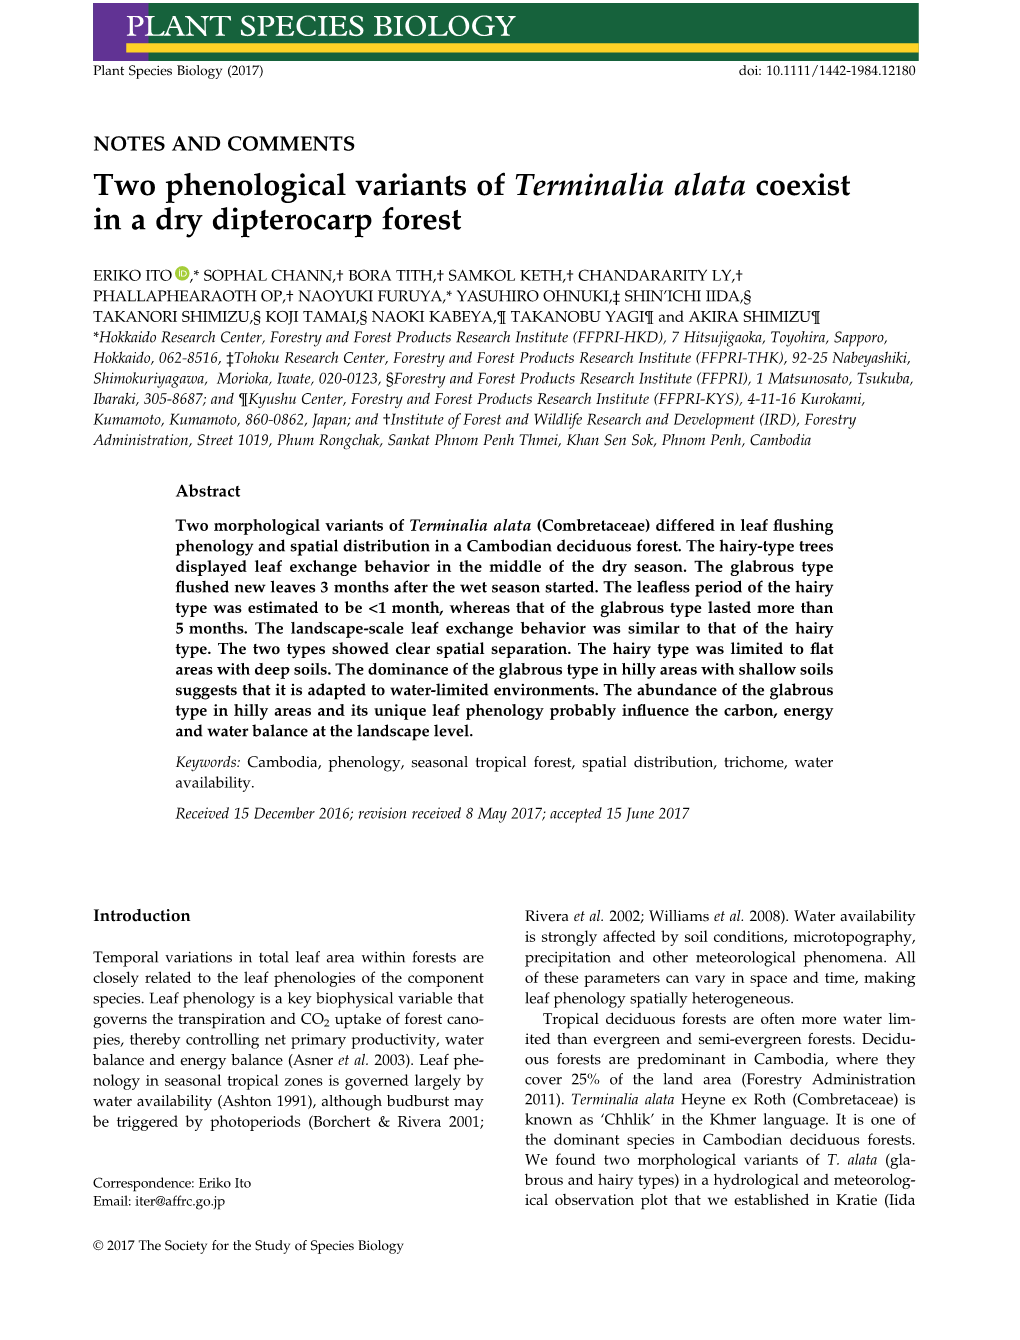 Phenological Variants of Terminalia Alata Coexist in a Dry Dipterocarp Forest